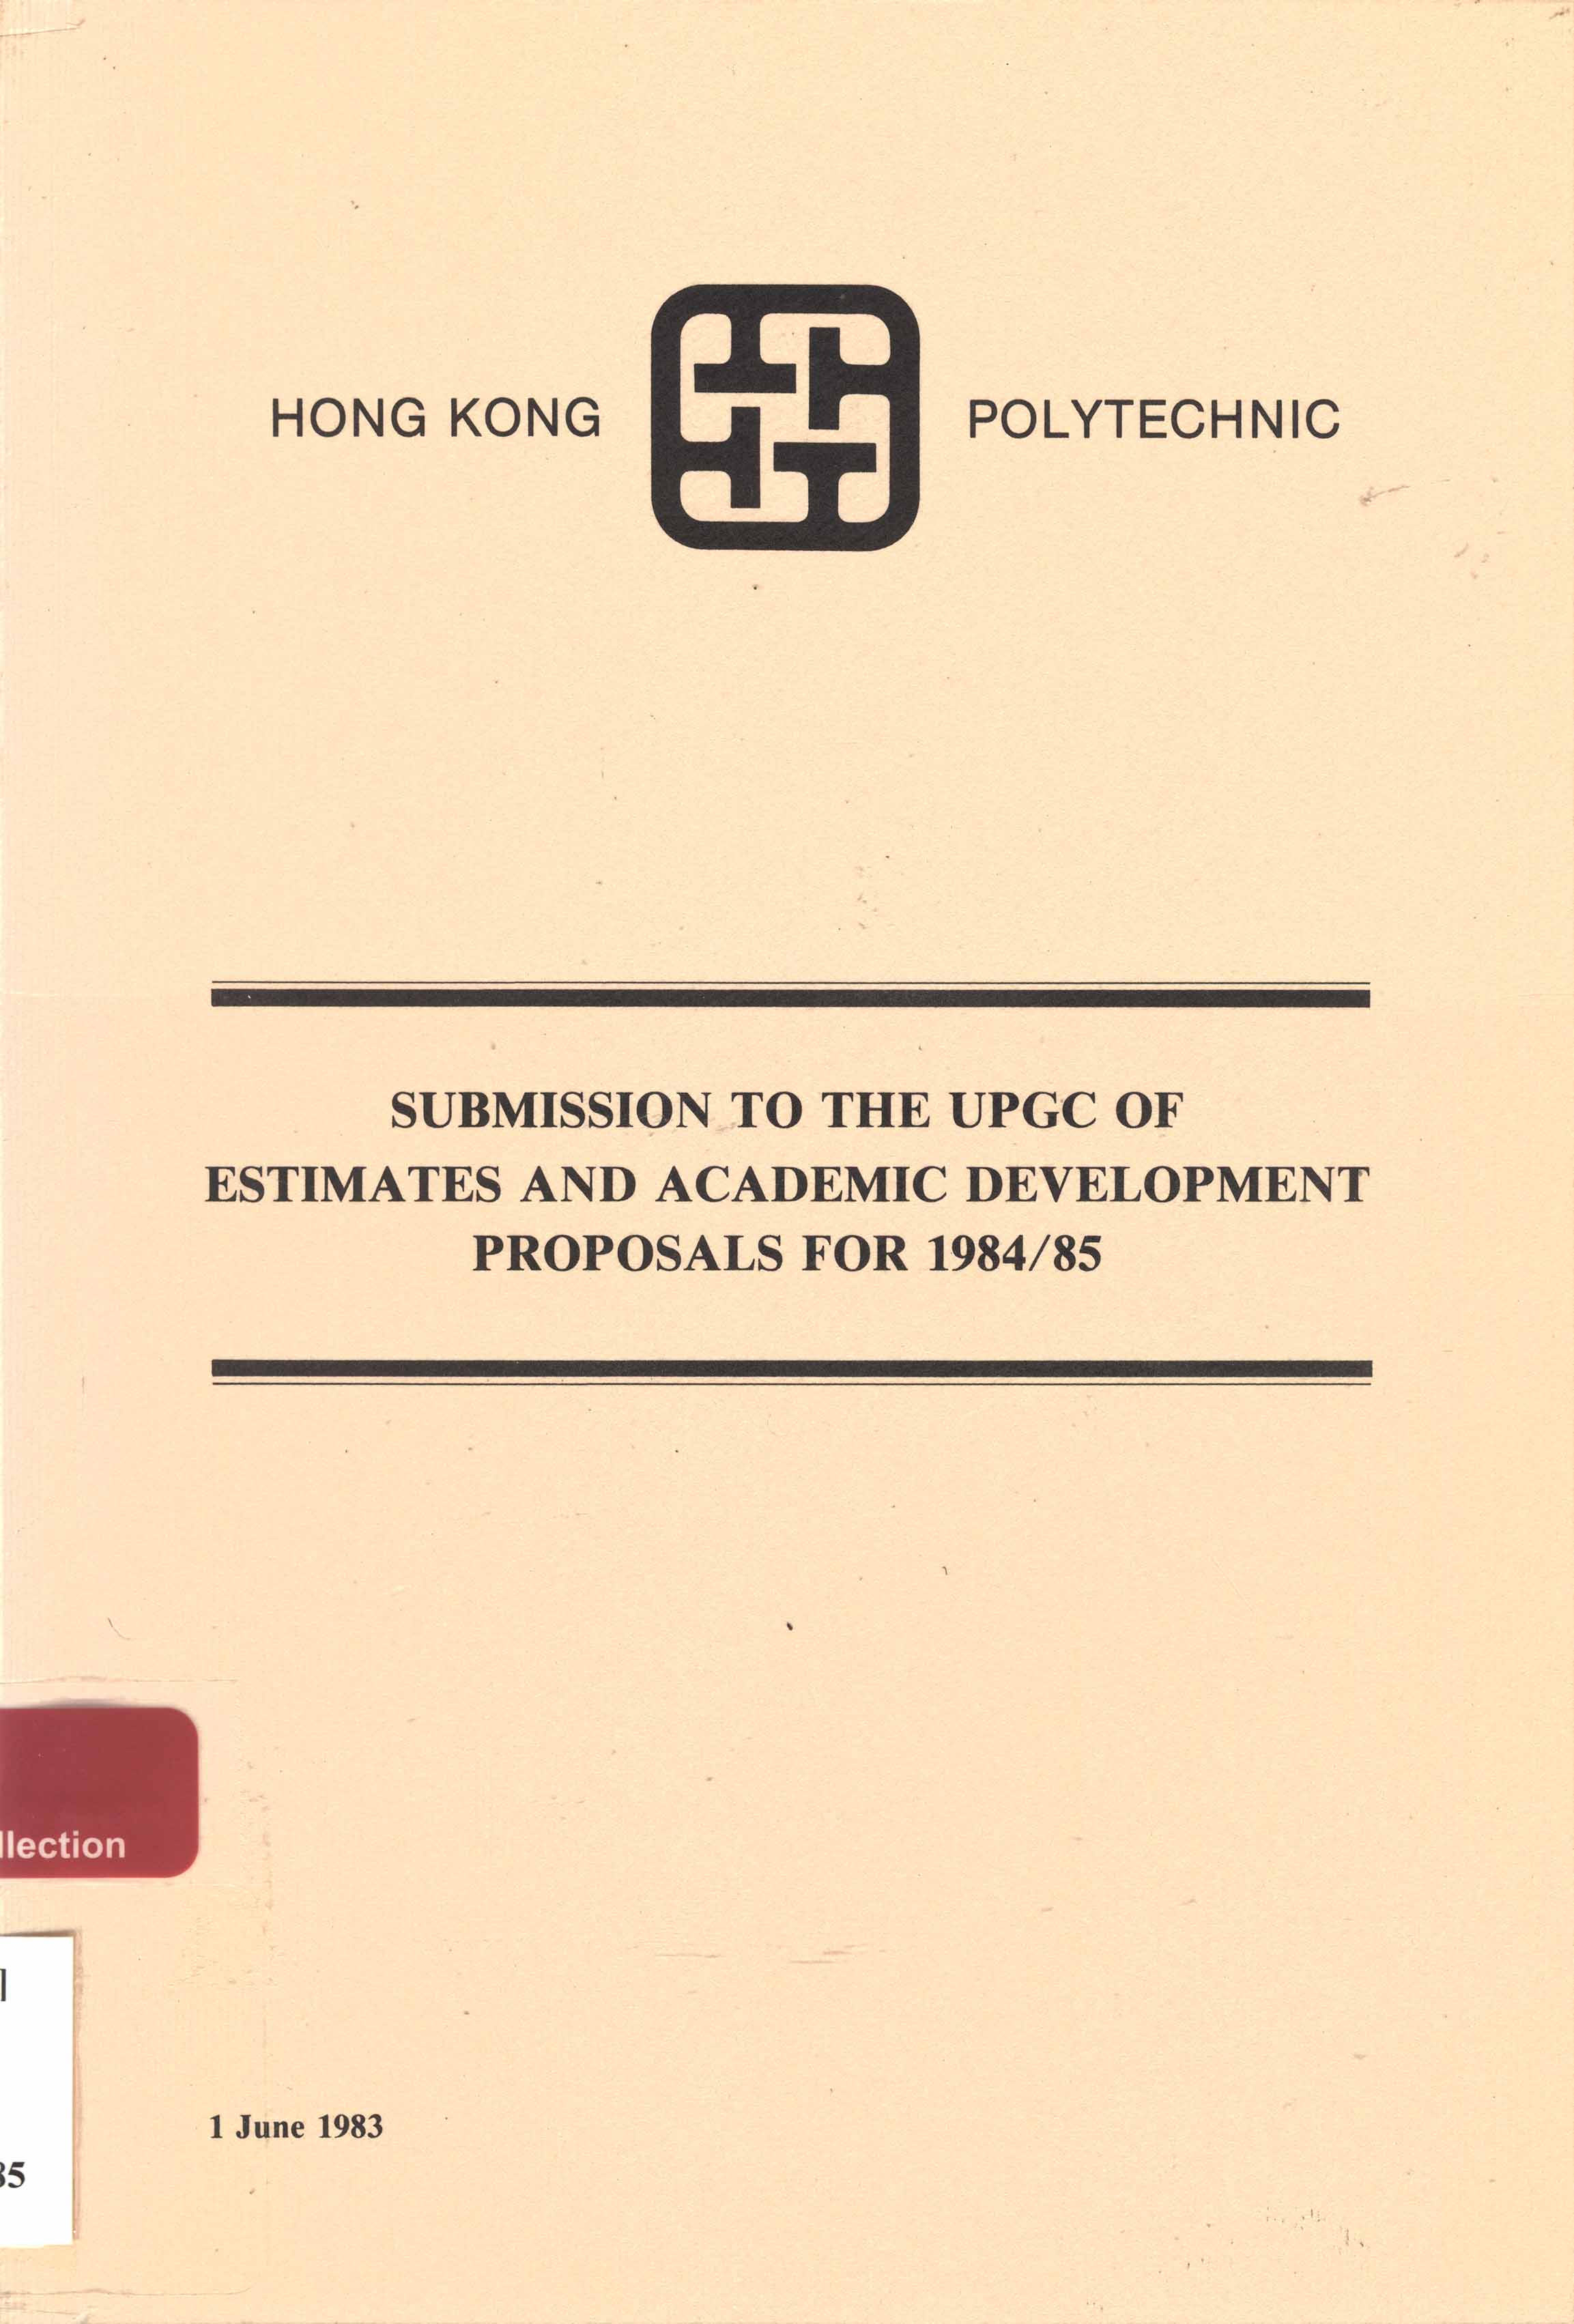 Submission to the UPGC of estimates and academic development proposals for 1984/85